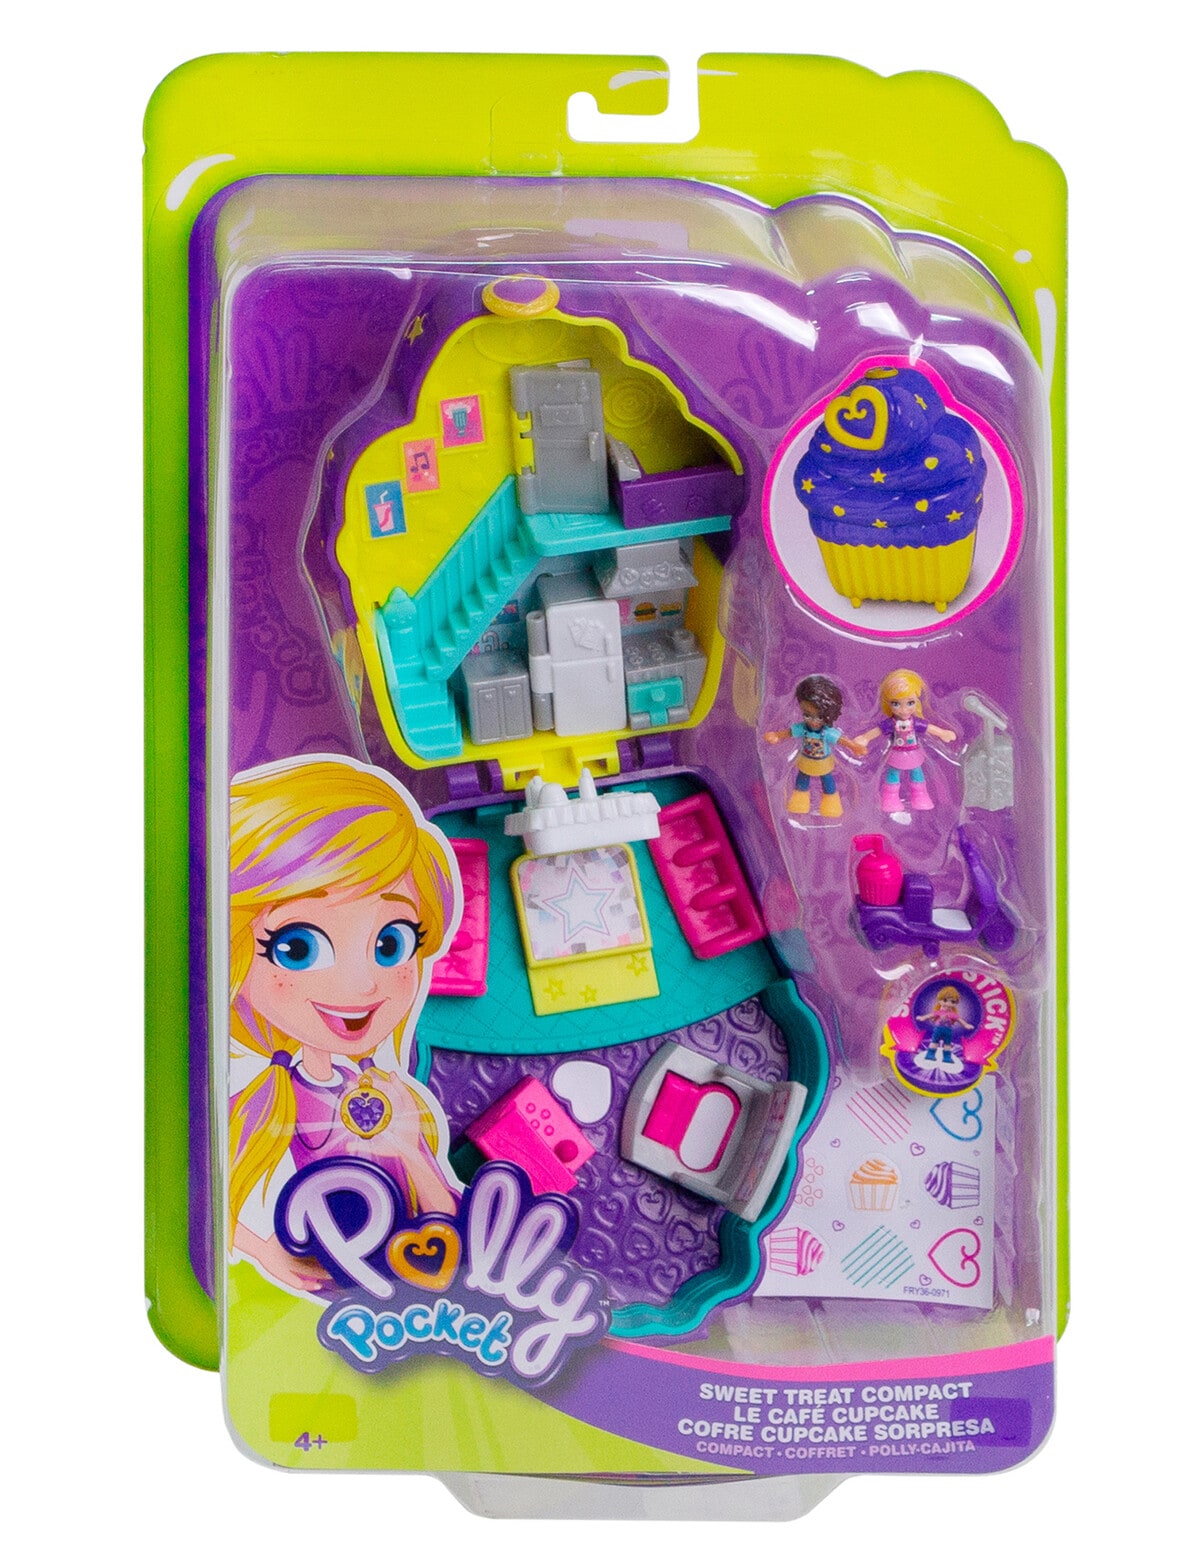  Polly Pocket Tiny Pocket Places Studio Compact with